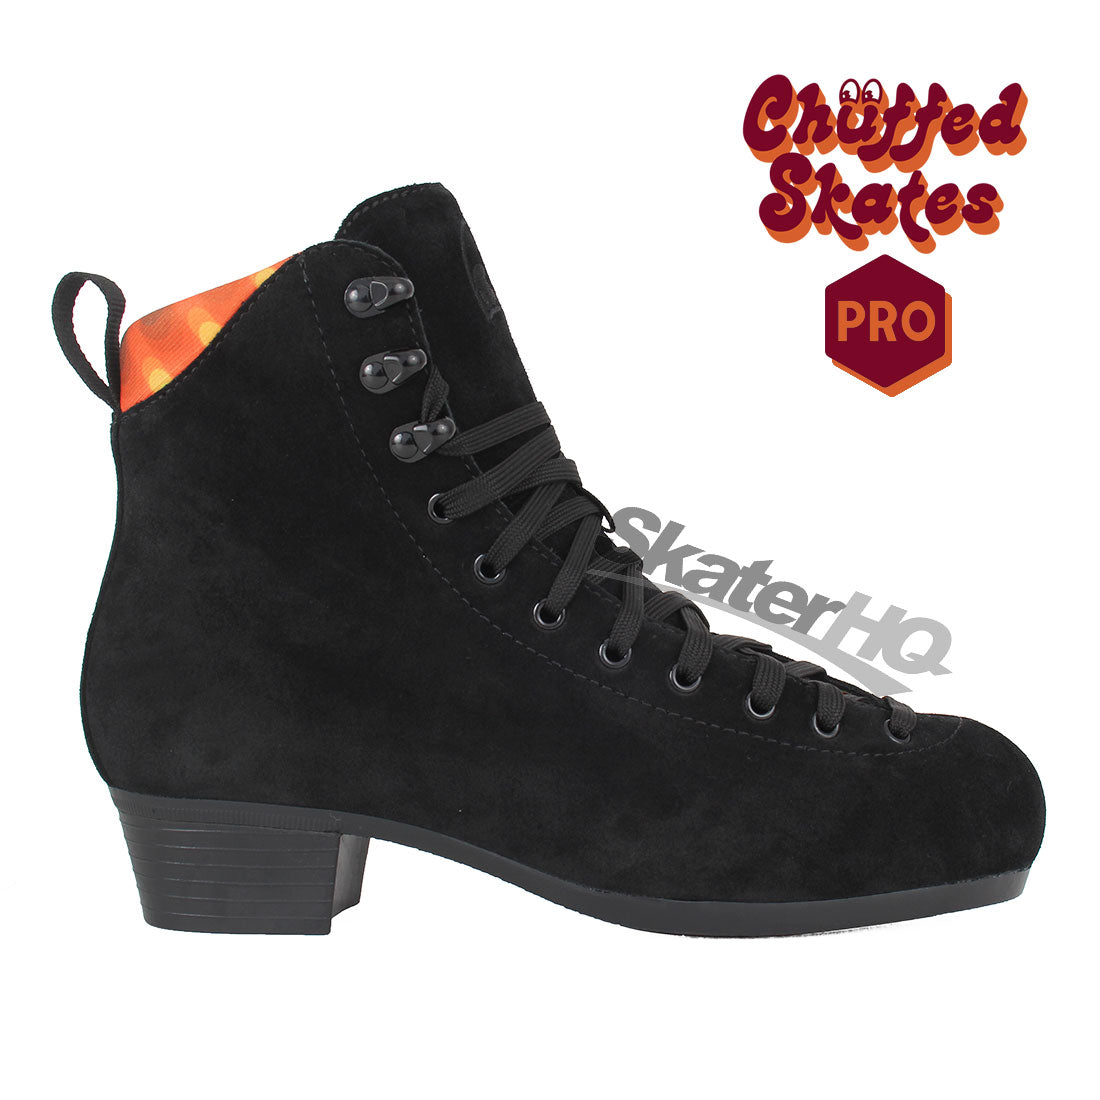 Chuffed Pro Boot Black 9US Roller Skate Boots